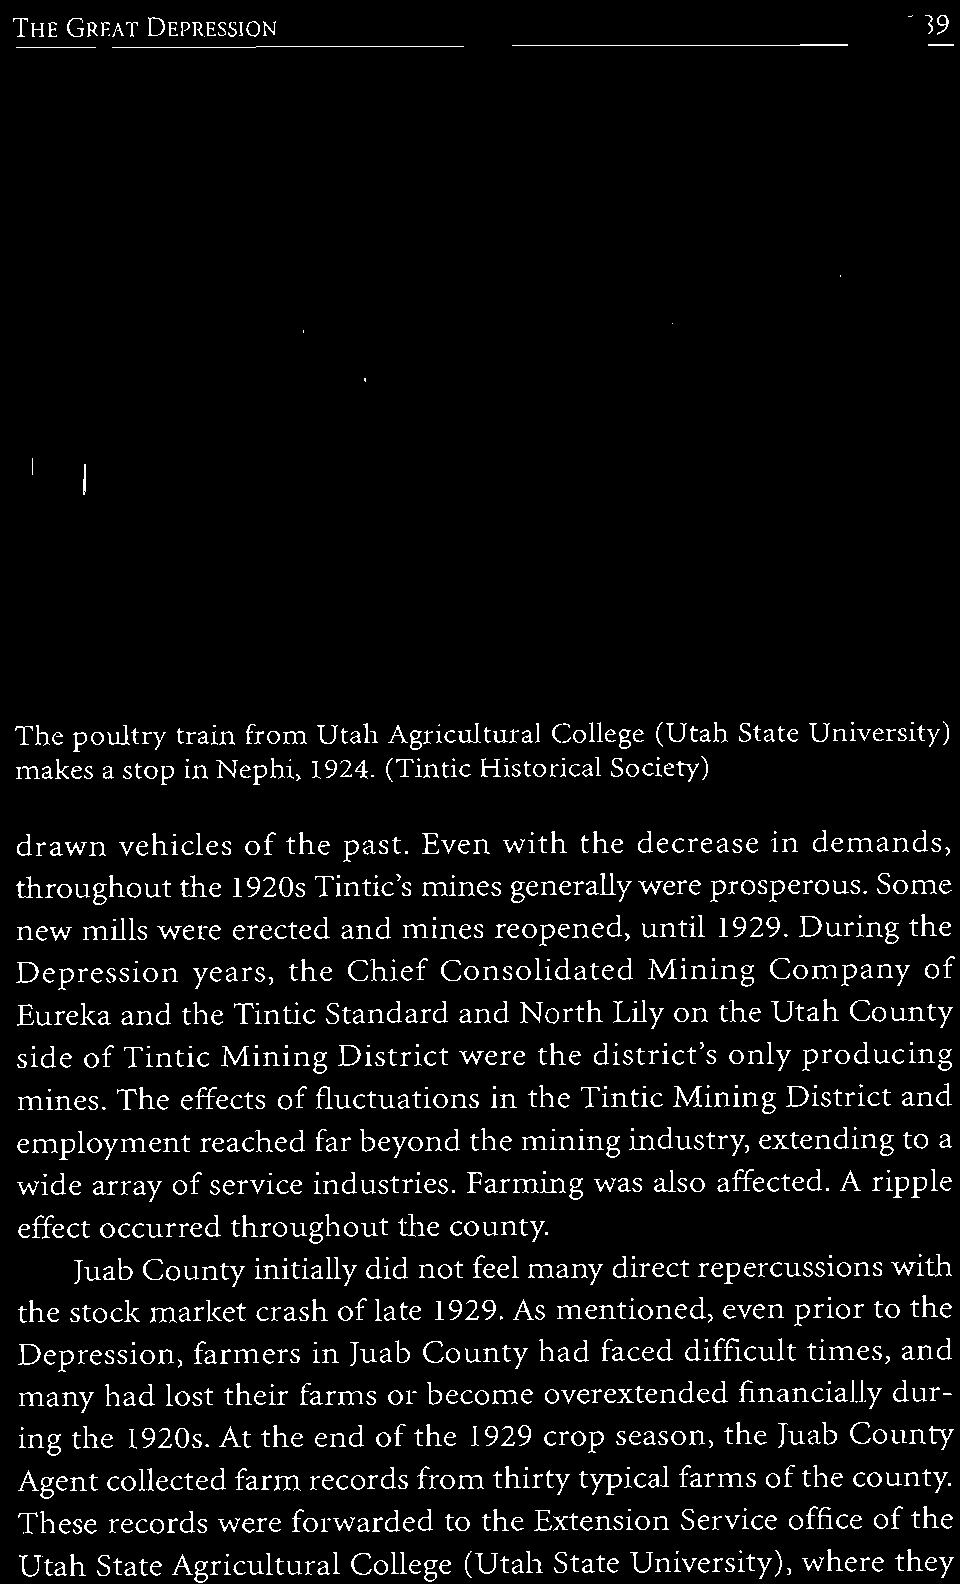 During the Depression years, the Chief Consolidated Mining Company of Eureka and the Tintic Standard and North Lily on the Utah County side of Tintic Mining District were the district's only